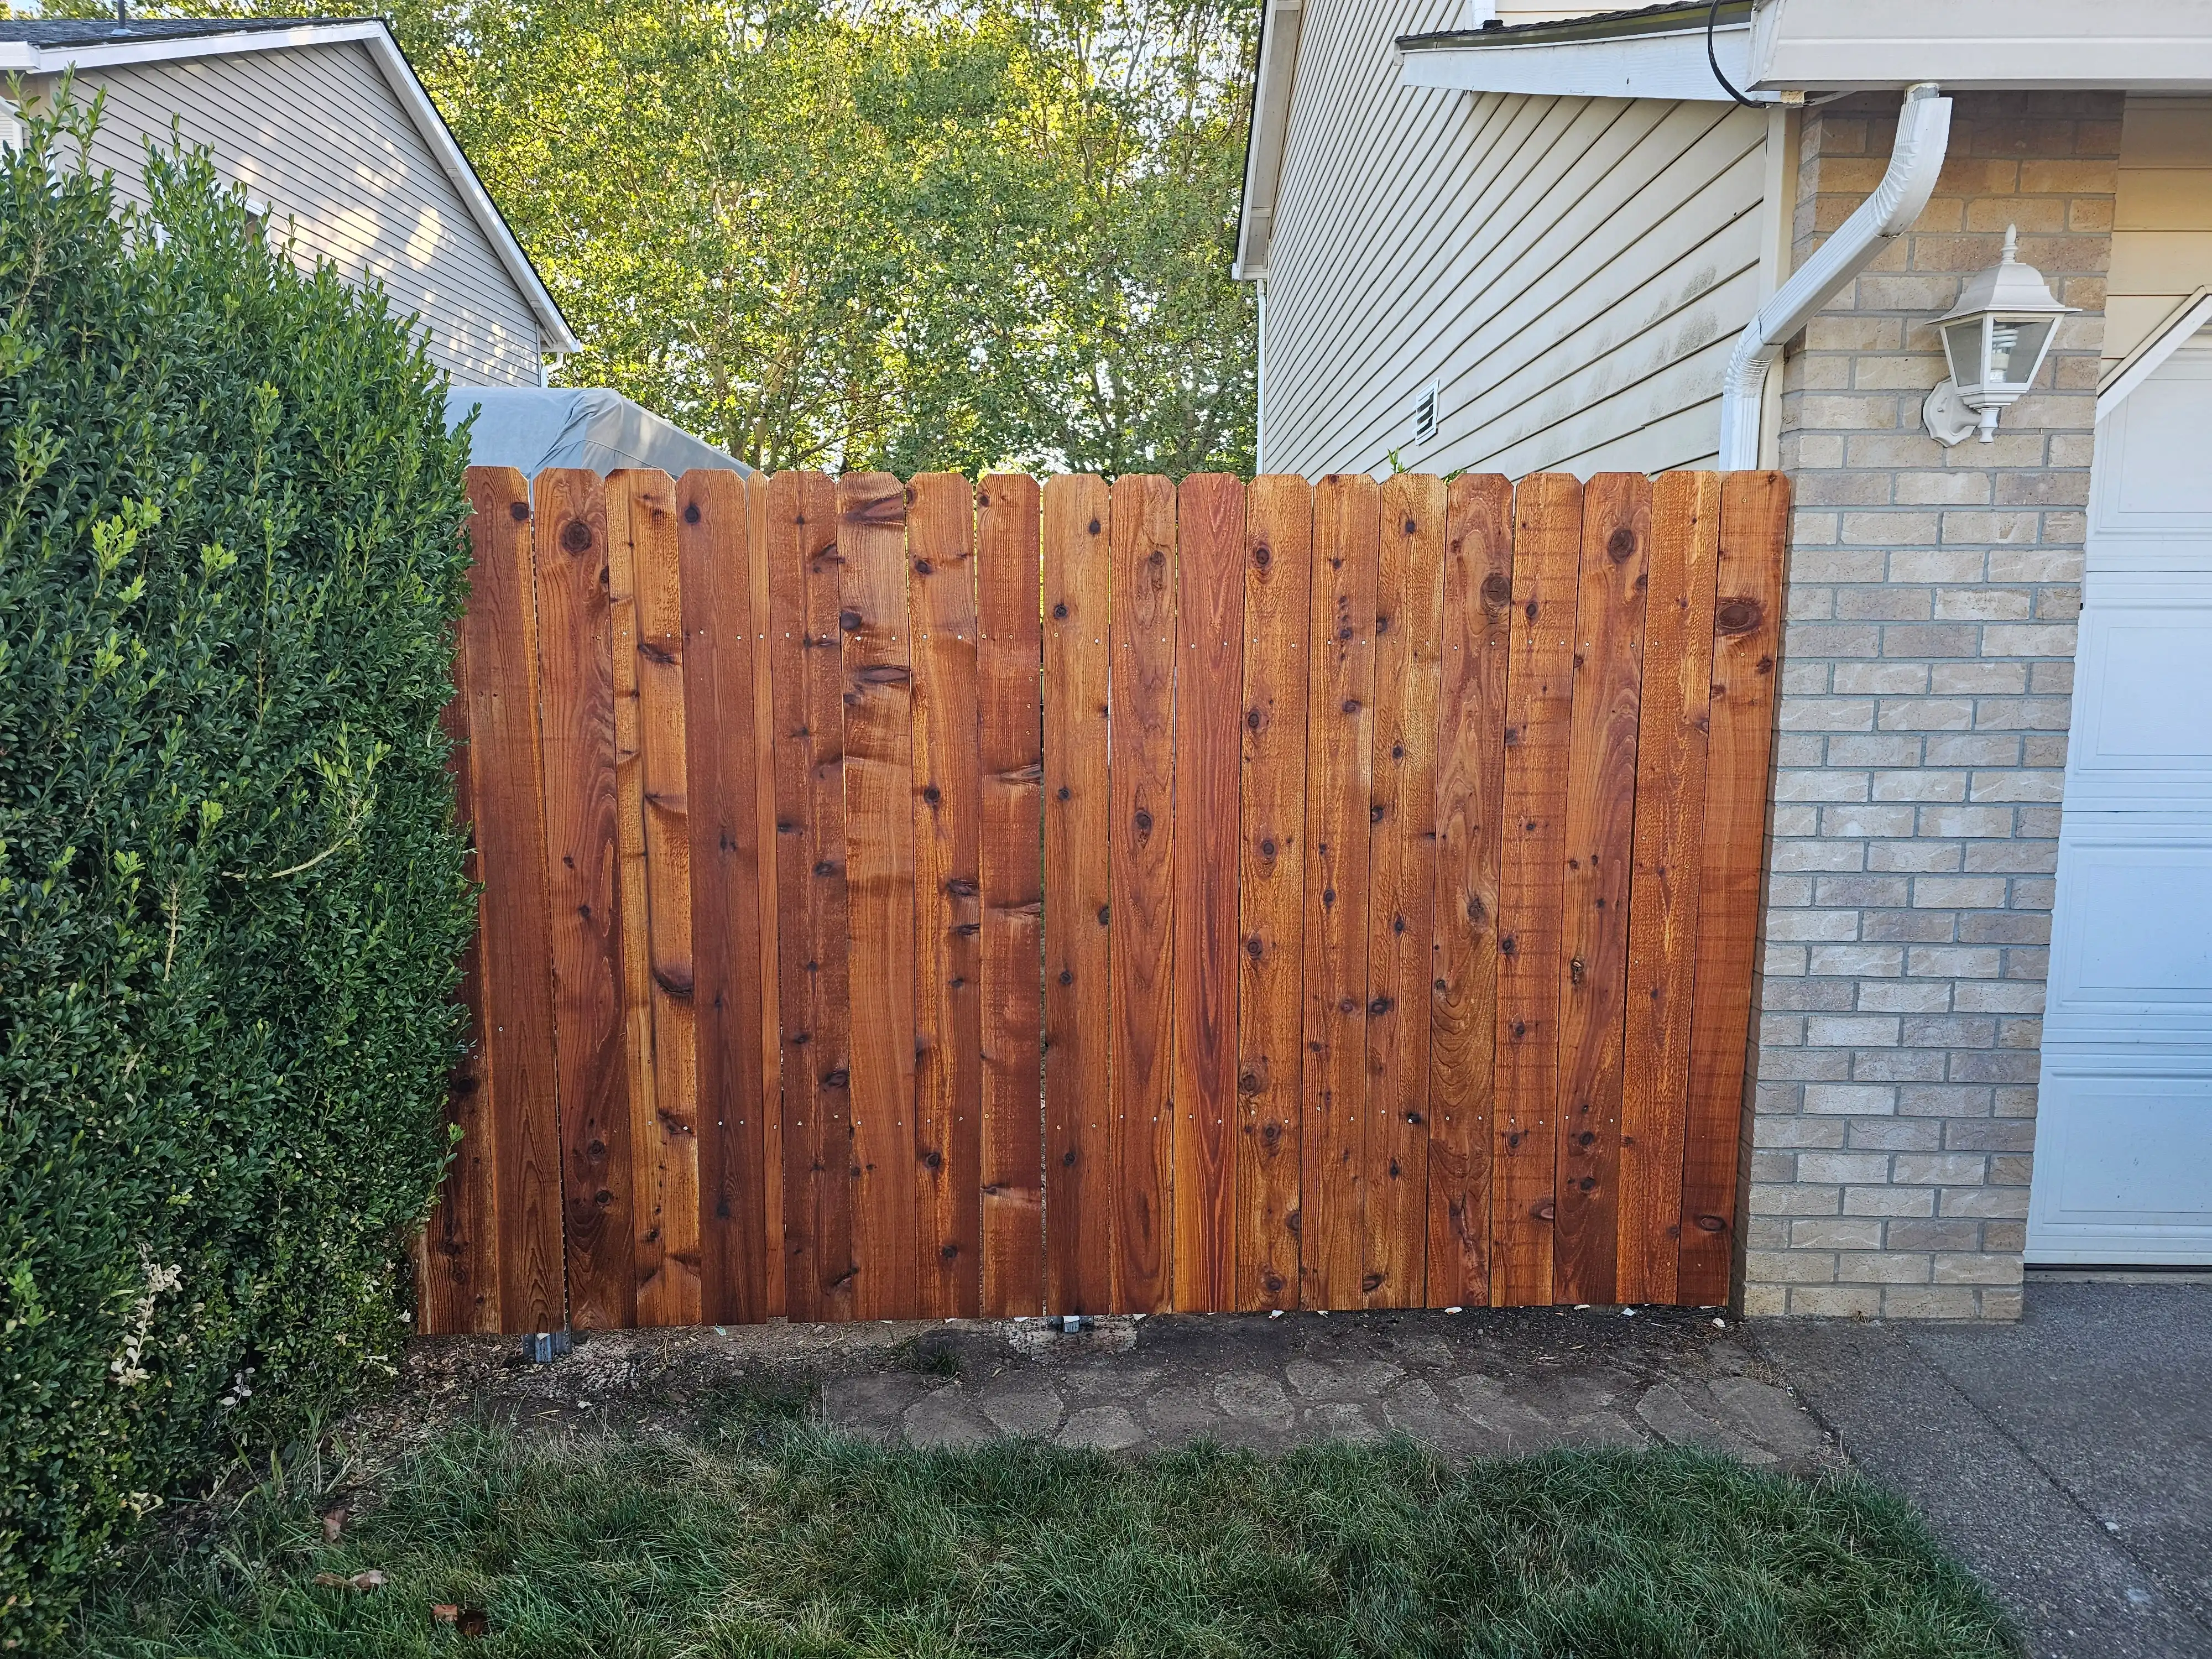 A very nice looking fence.